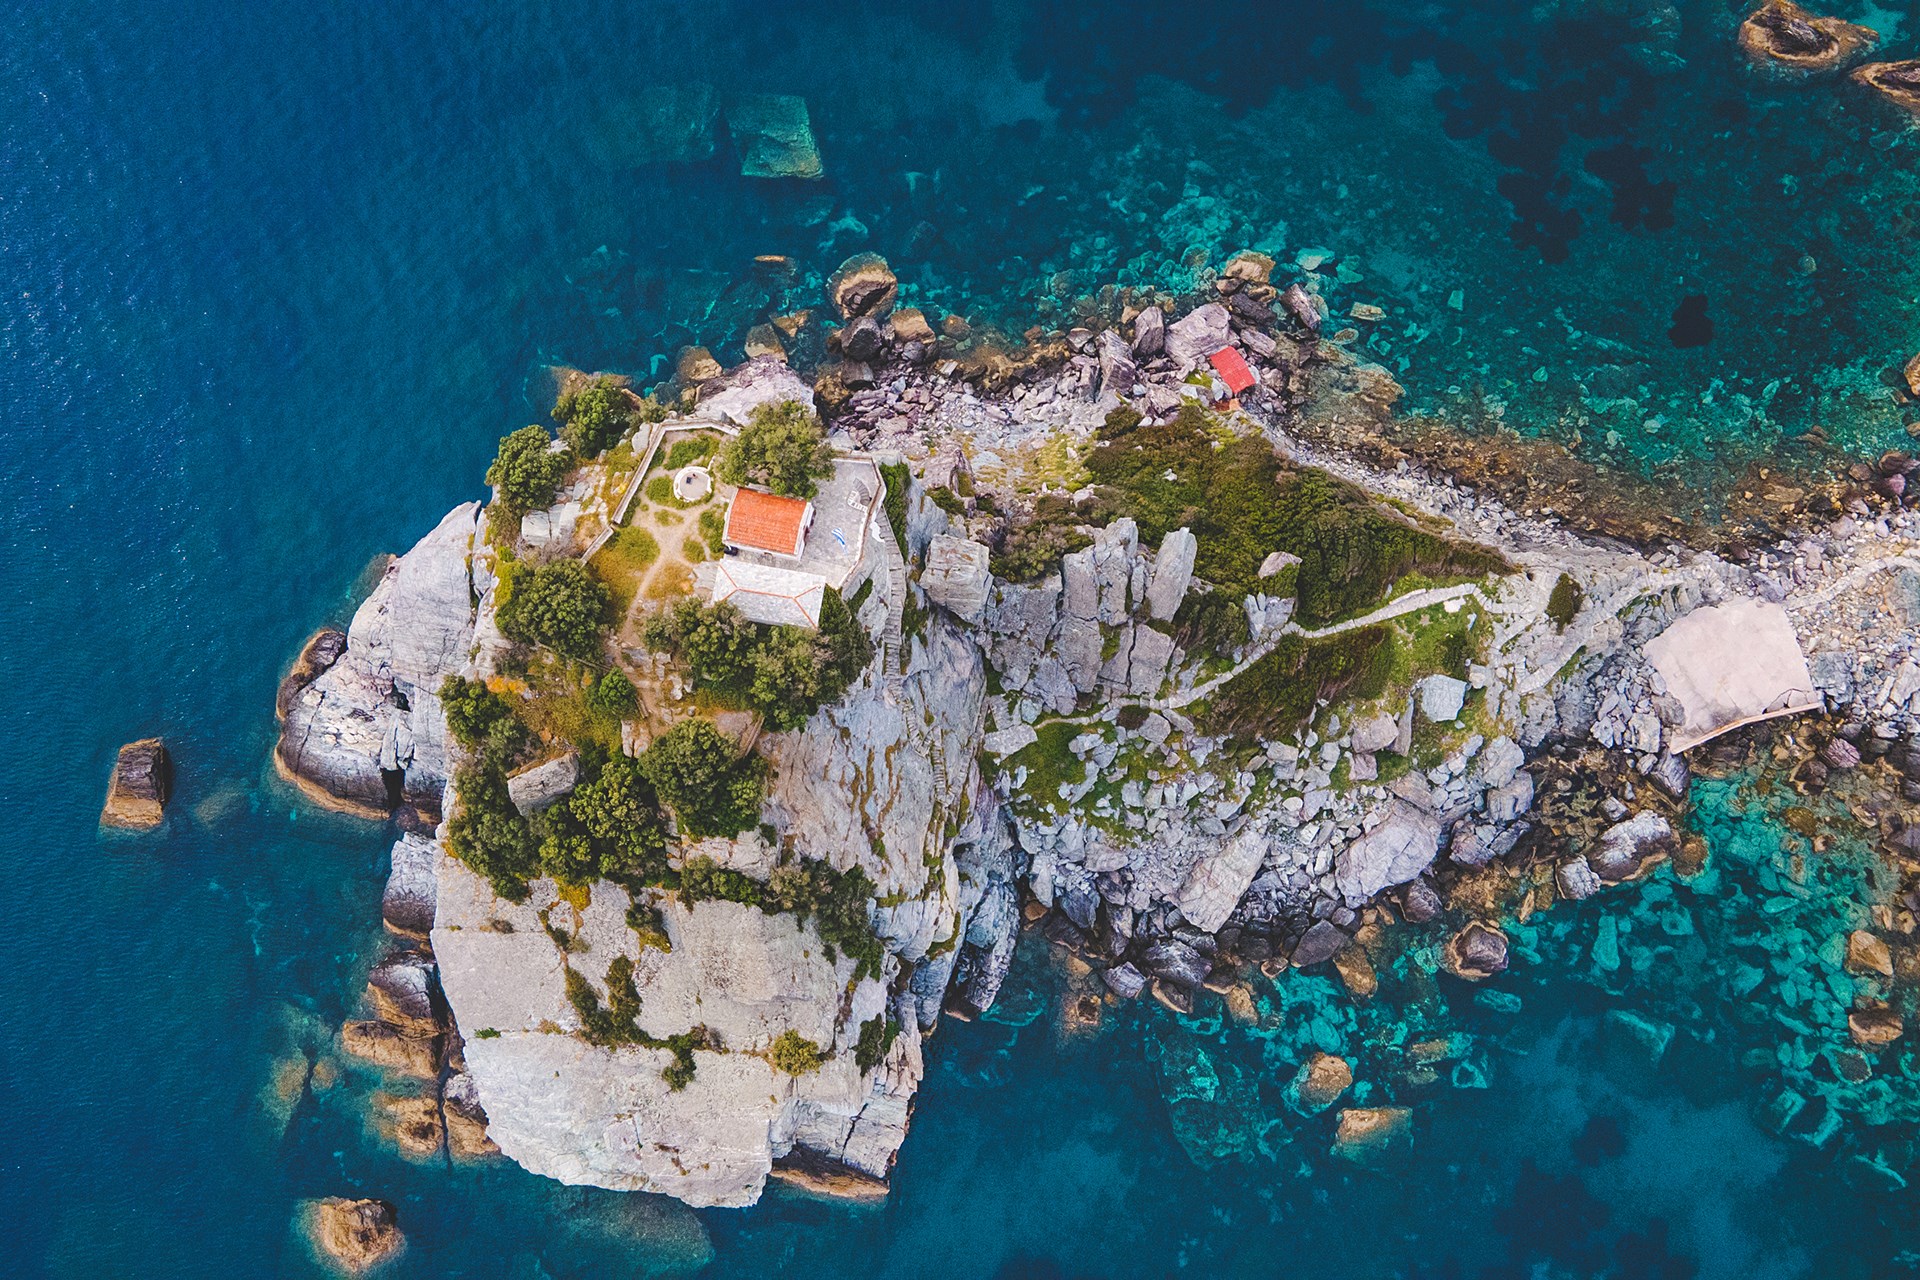 Relive Mamma Mia! on Skopelos - The Thinking Traveller